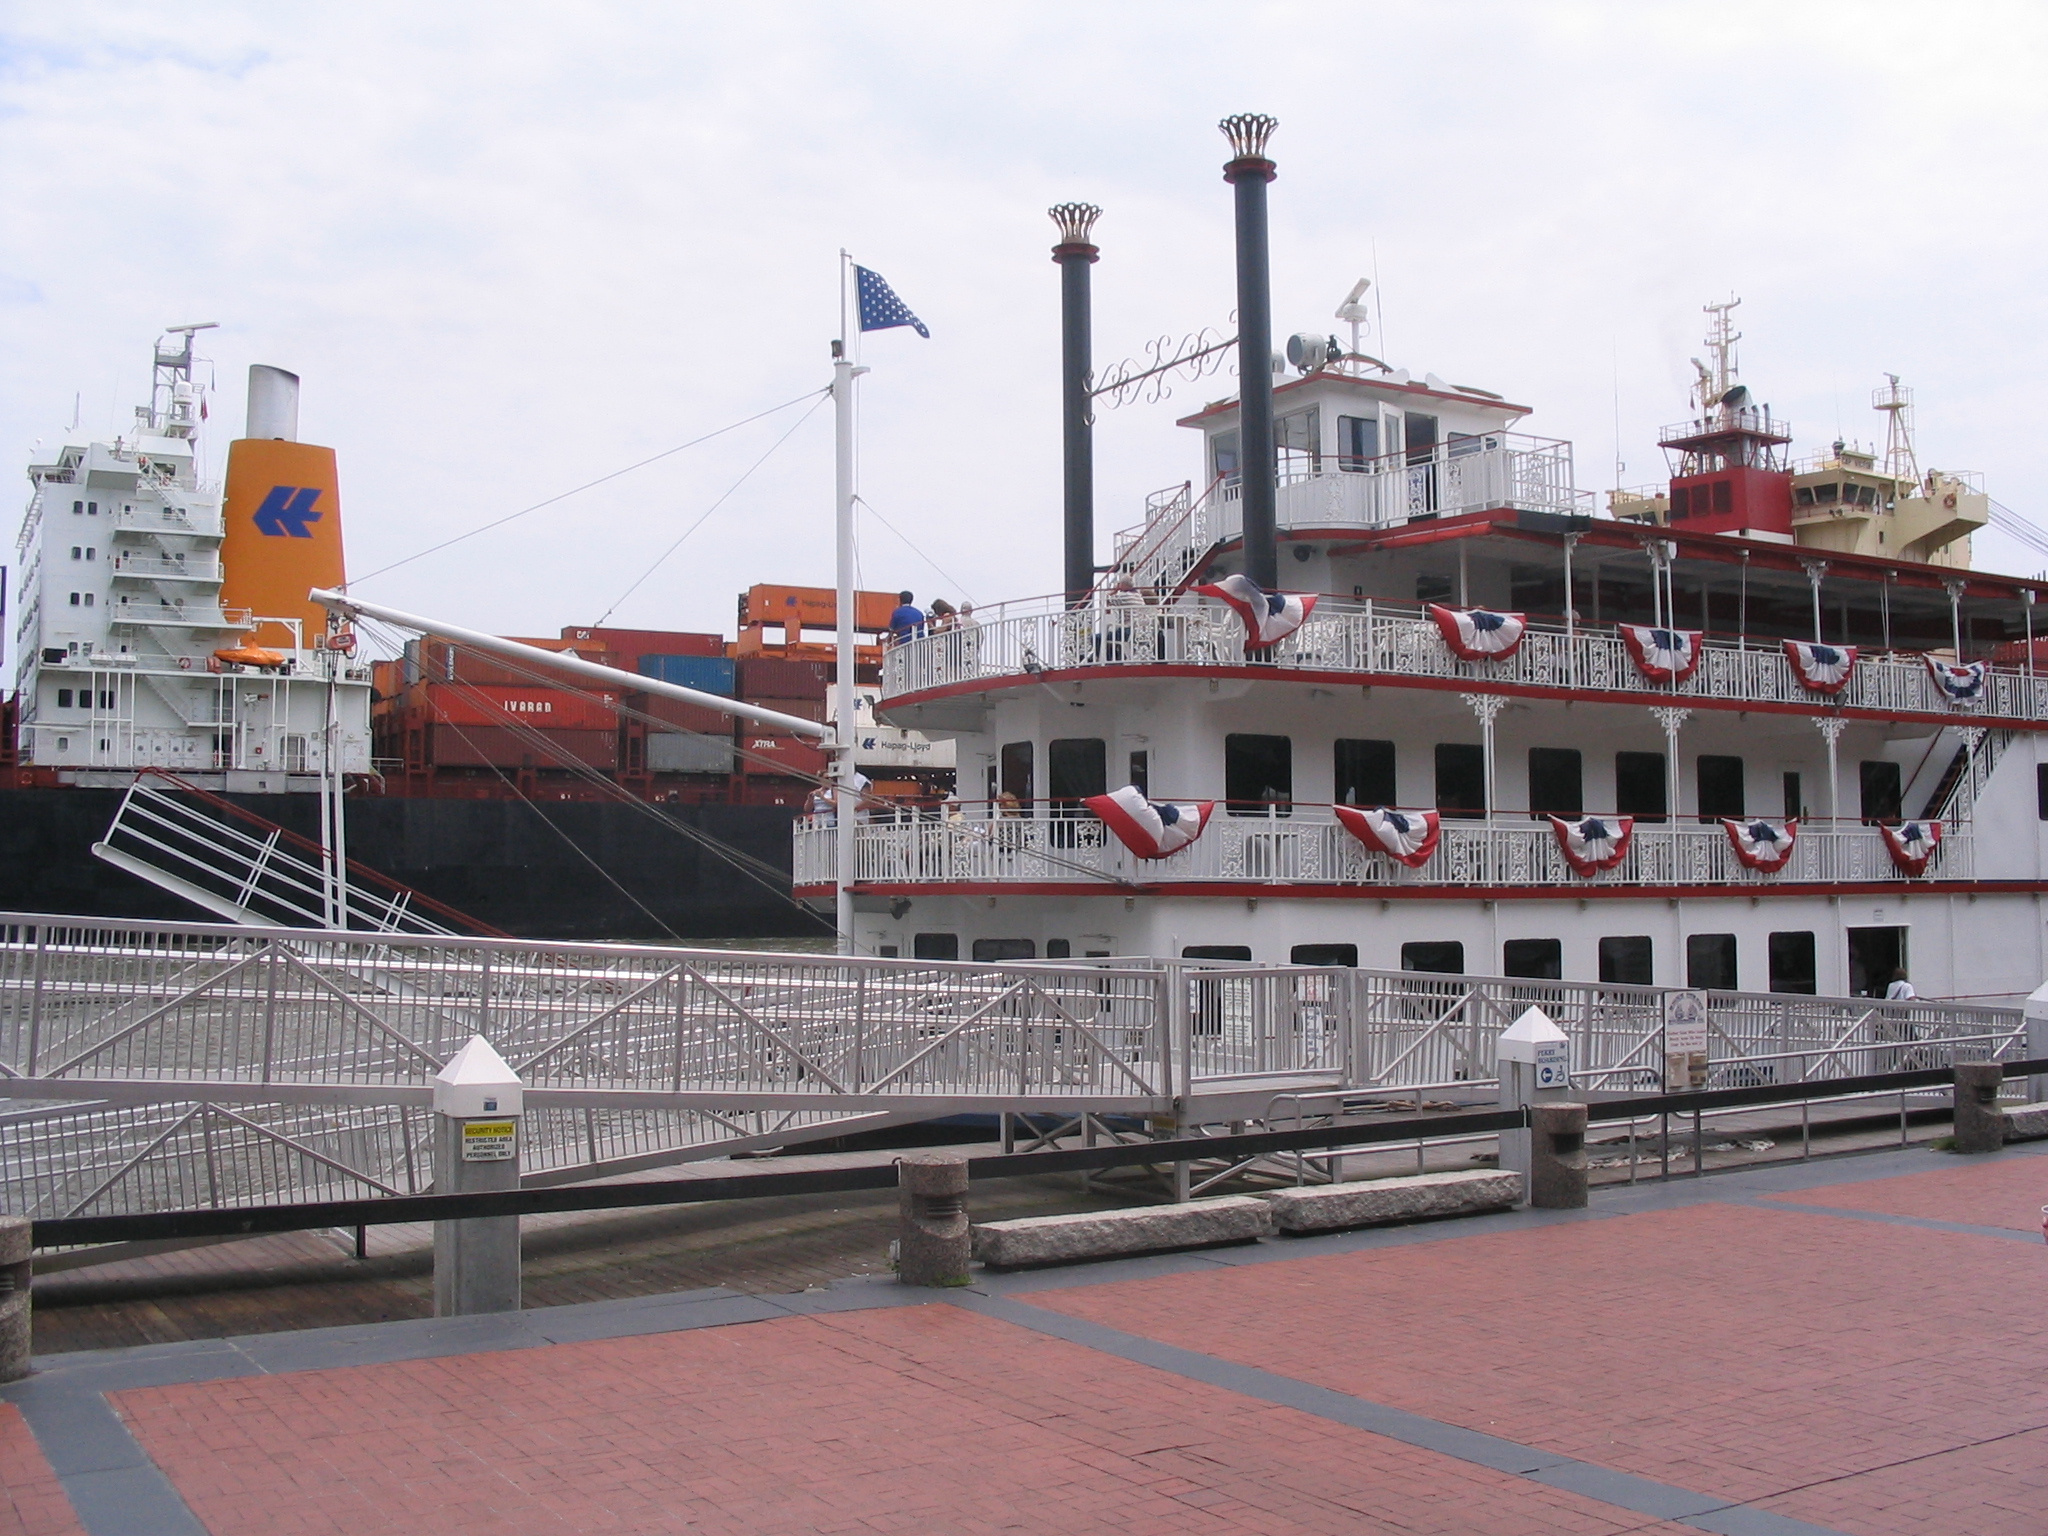 a large white ship sitting next to a red brick walkway